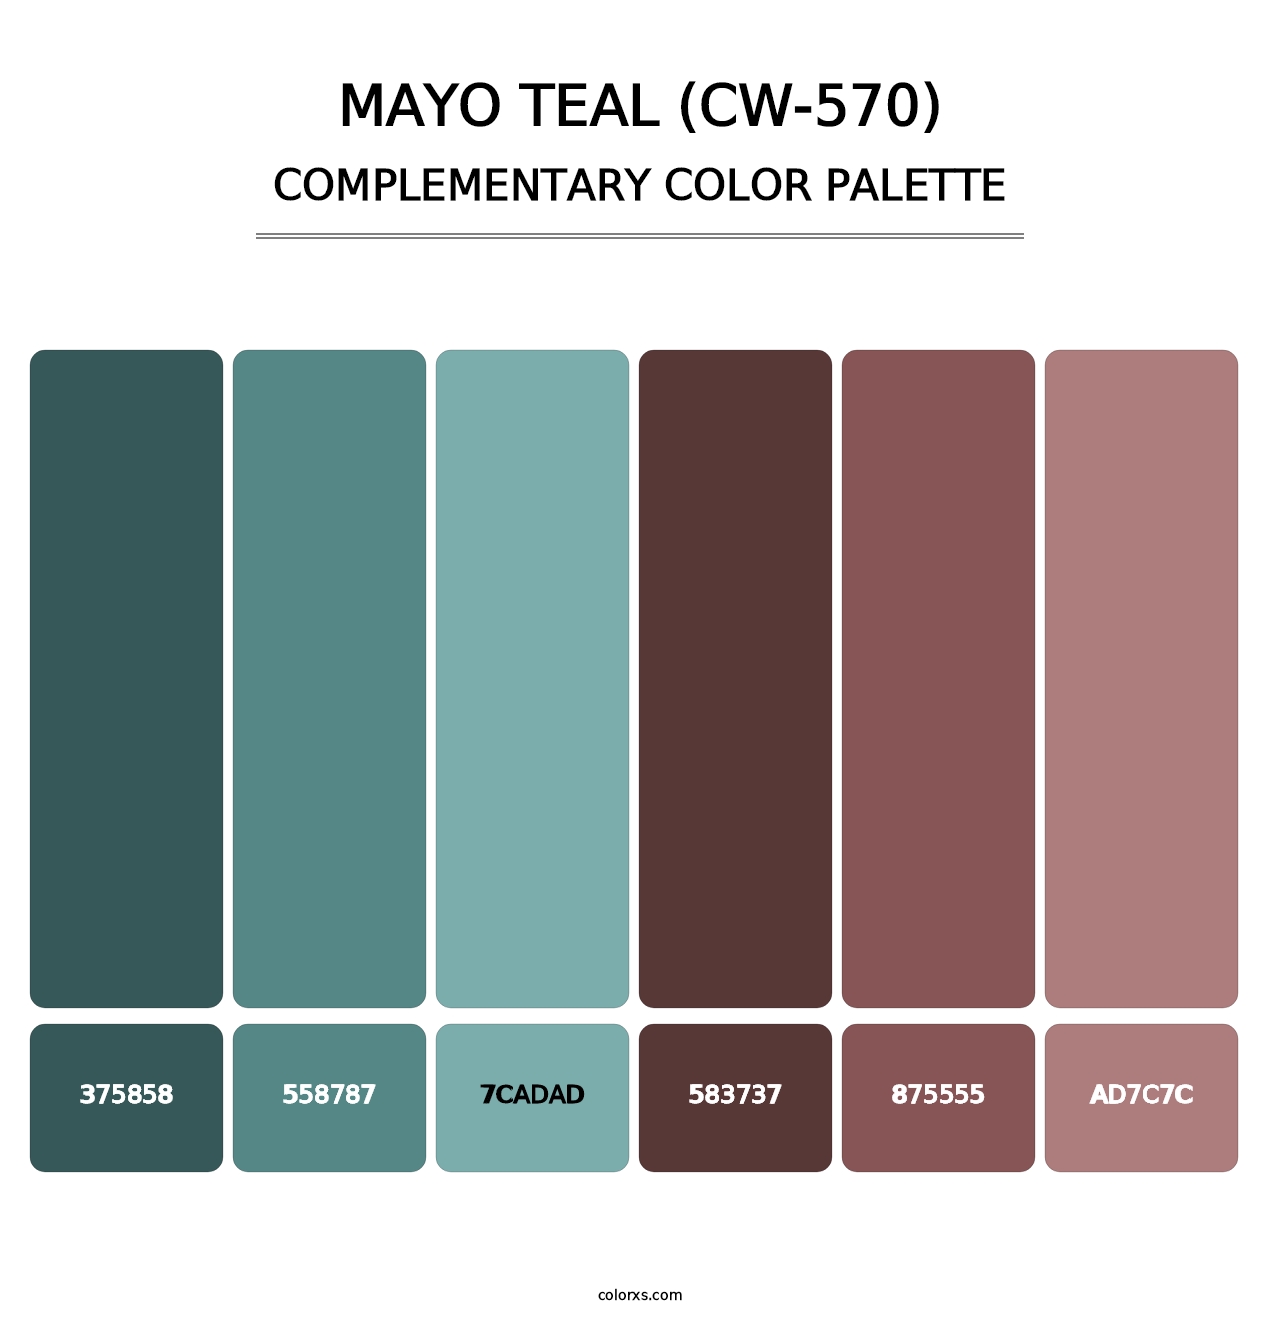 Mayo Teal (CW-570) - Complementary Color Palette